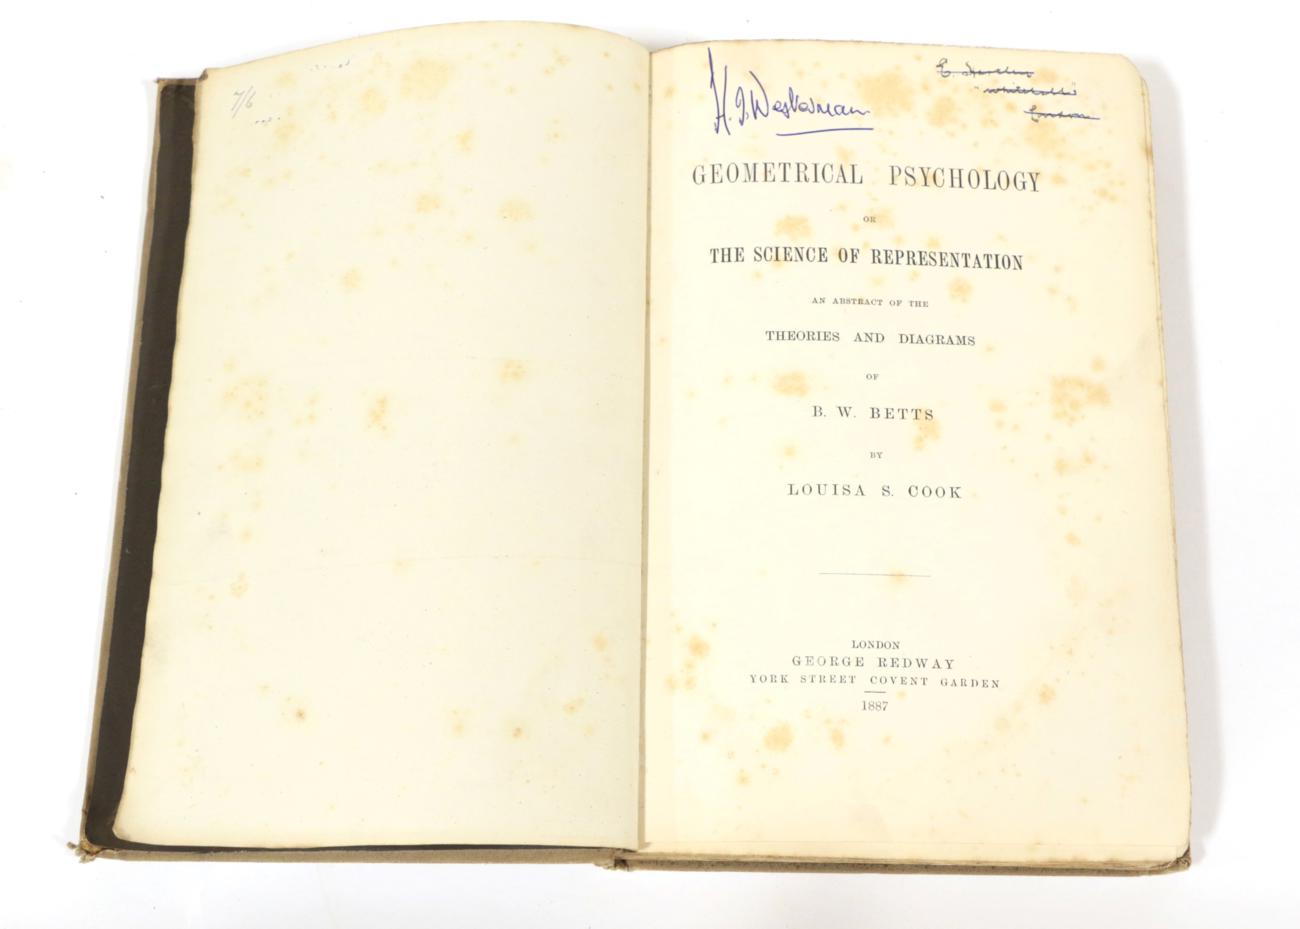 Lot 108 - Cook, Louisa S. Geometrical Psychology or the Science of Representation. George Redway, 1887....